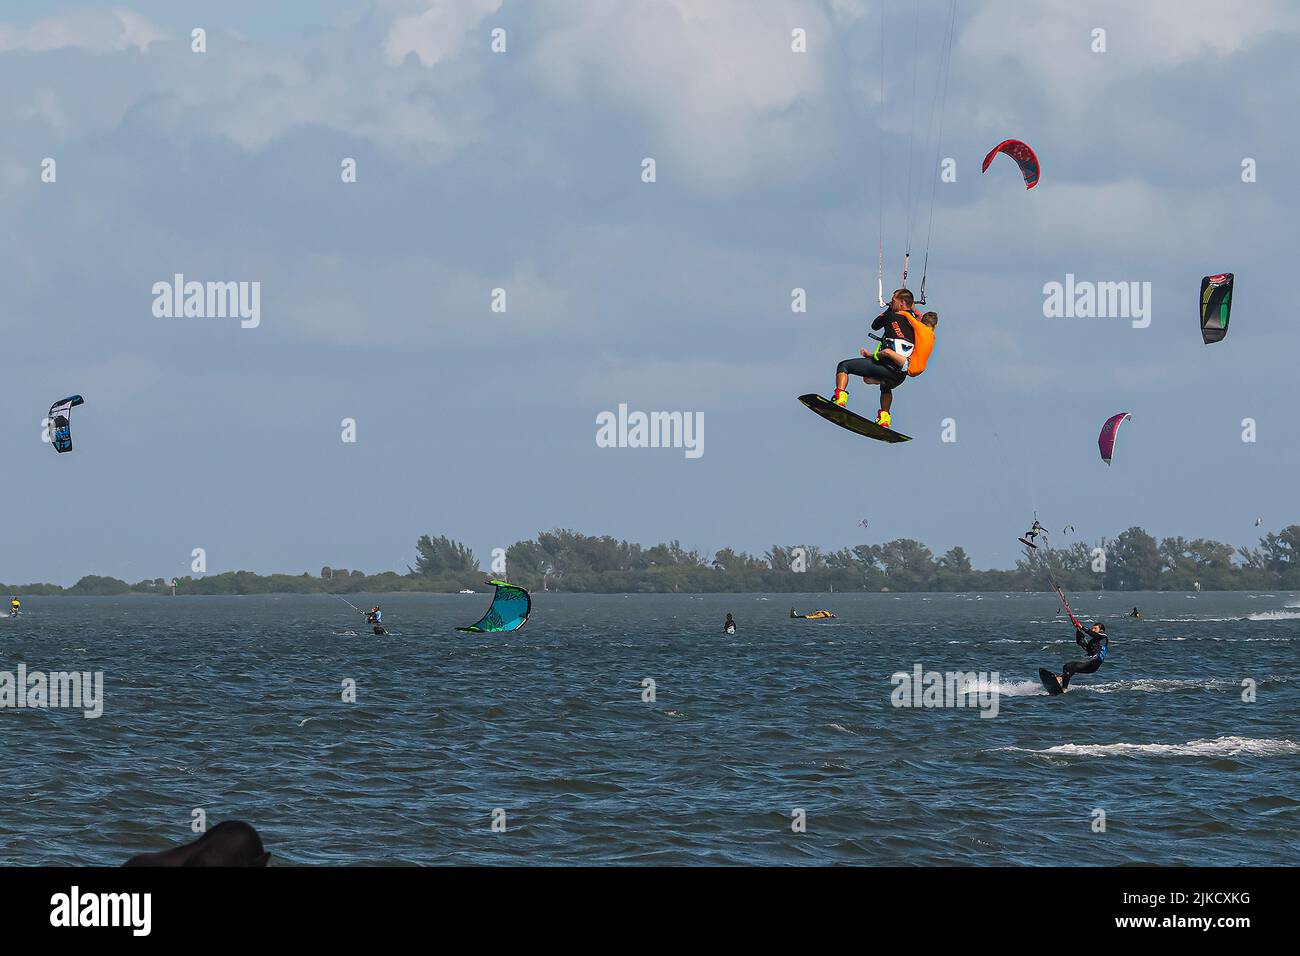 A view of the kite surfer in Tierra  Verde, United States Stock Photo